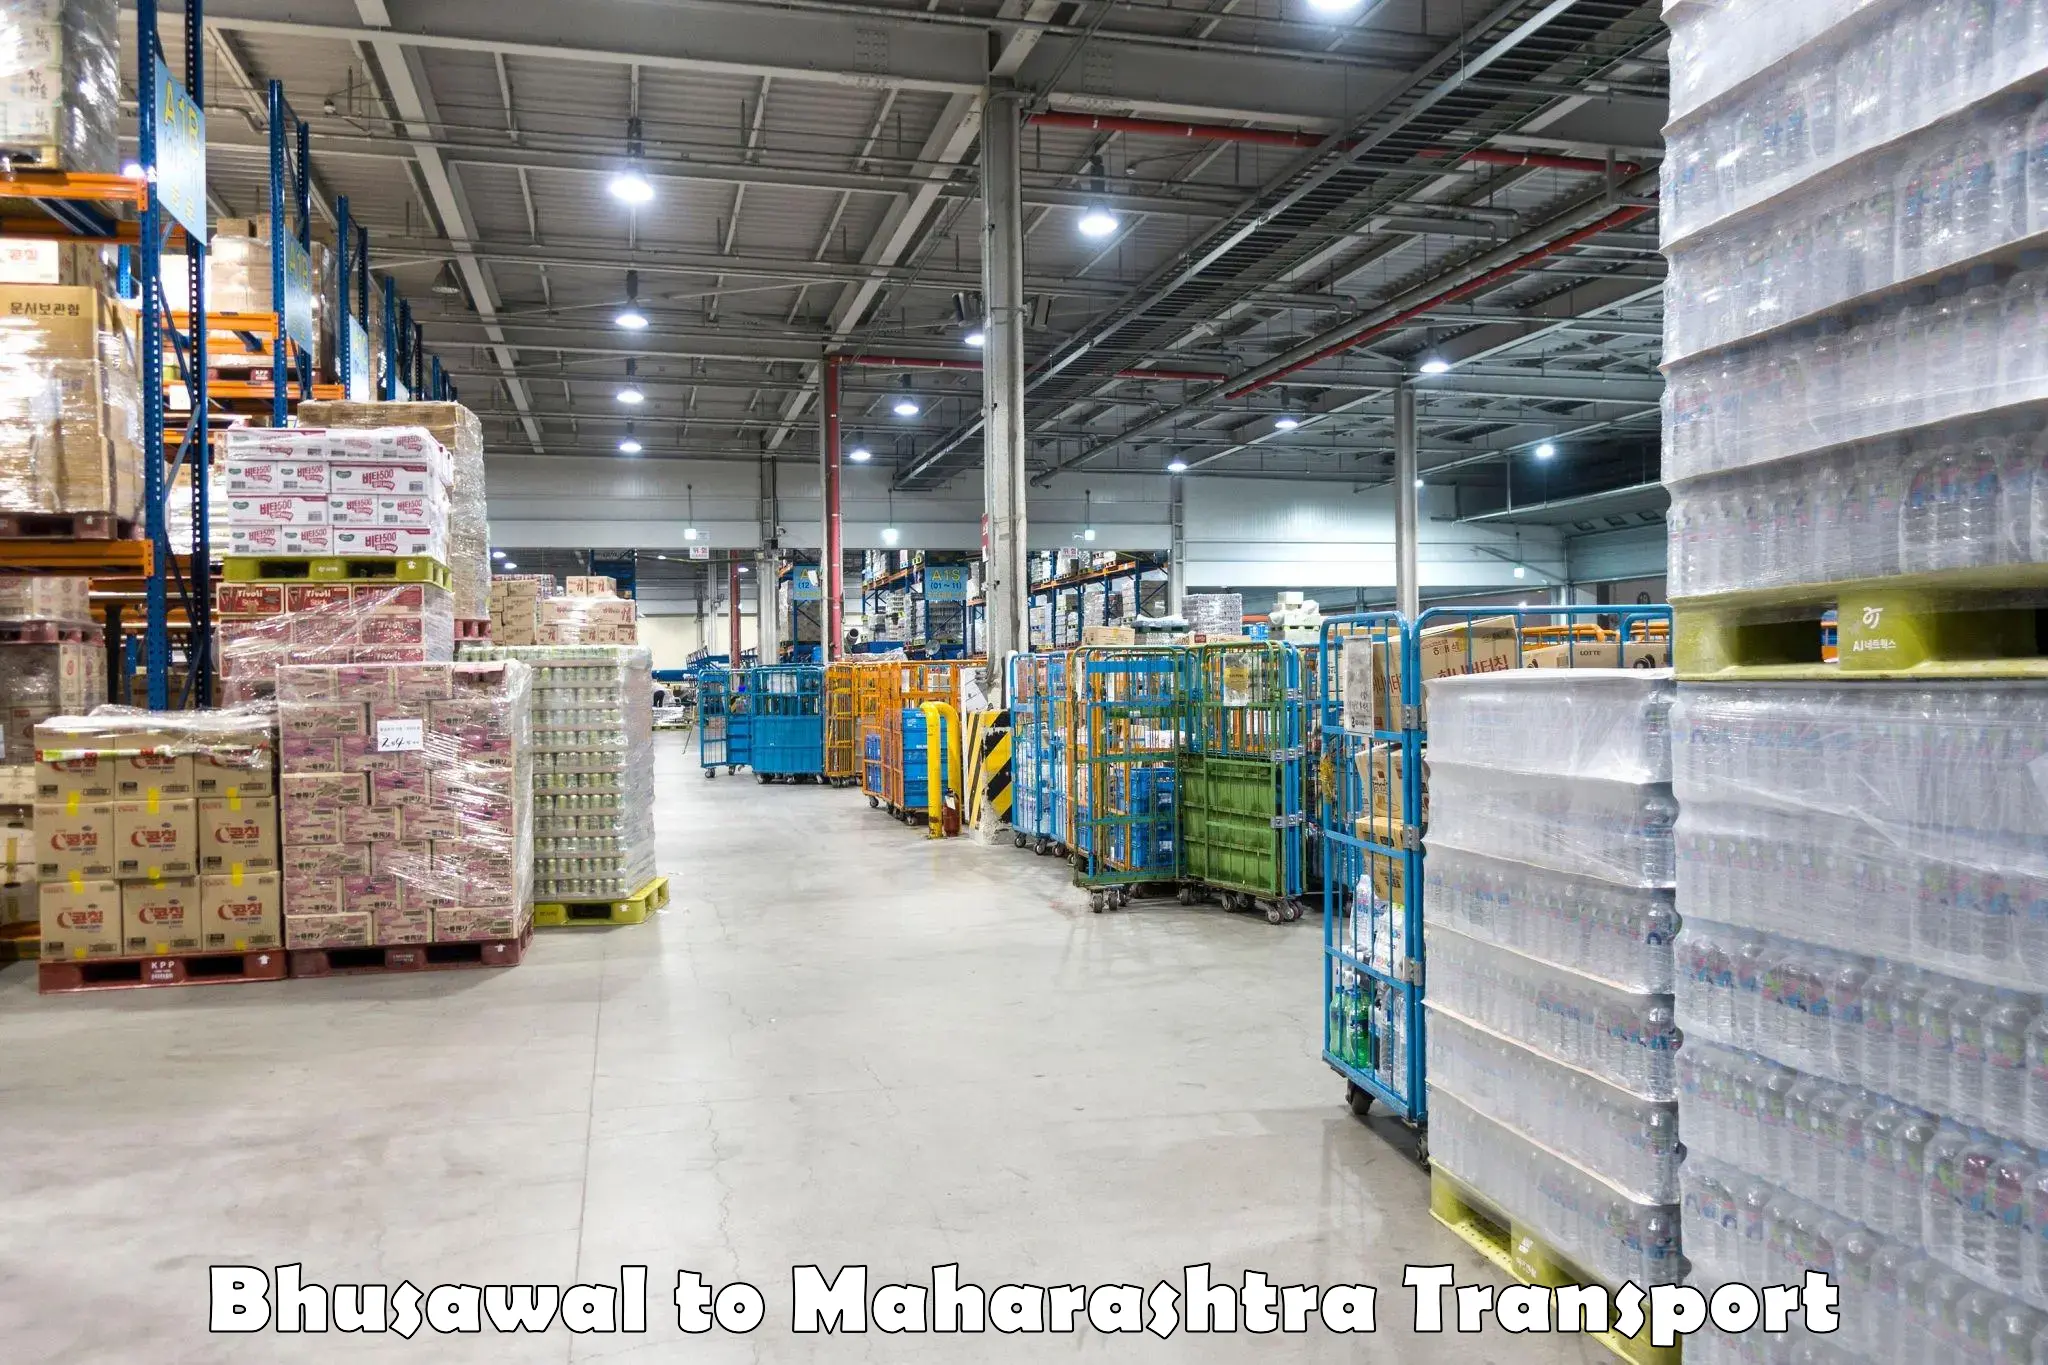 Truck transport companies in India Bhusawal to Wai